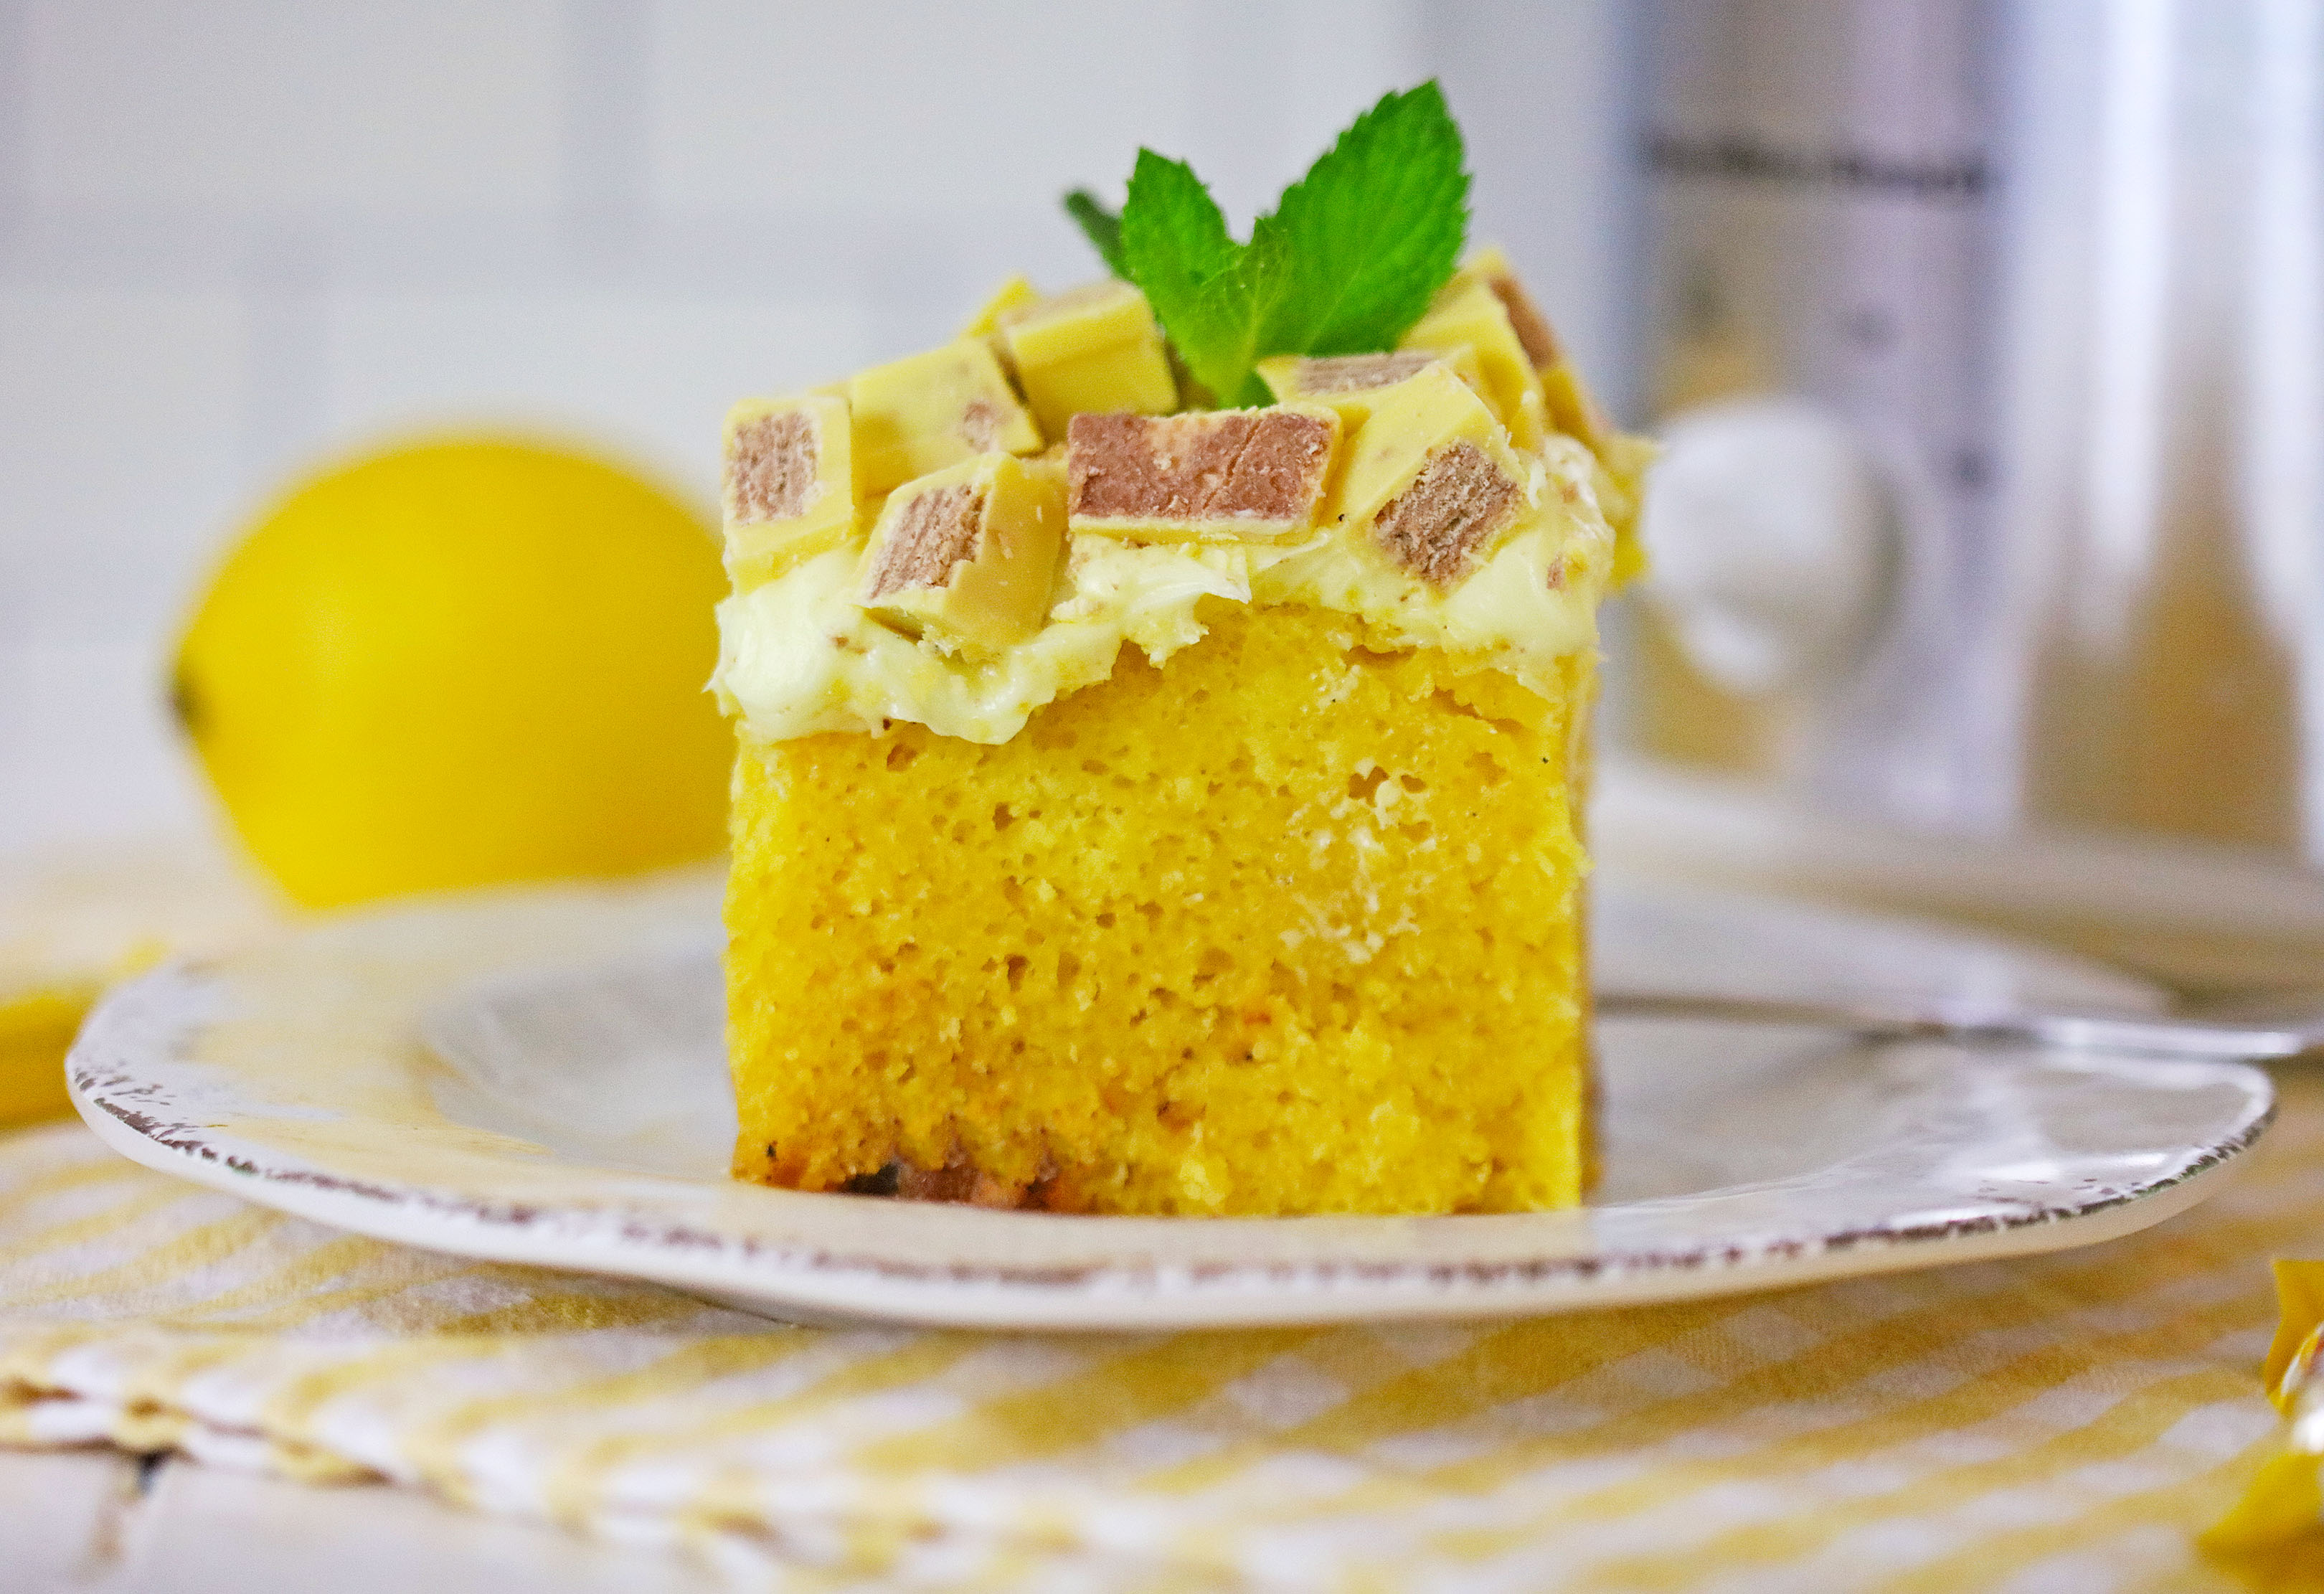 Treat yourself to a heavenly slice of Slow Cooker lemon crunch cake! A delightful dessert to brighten your day!